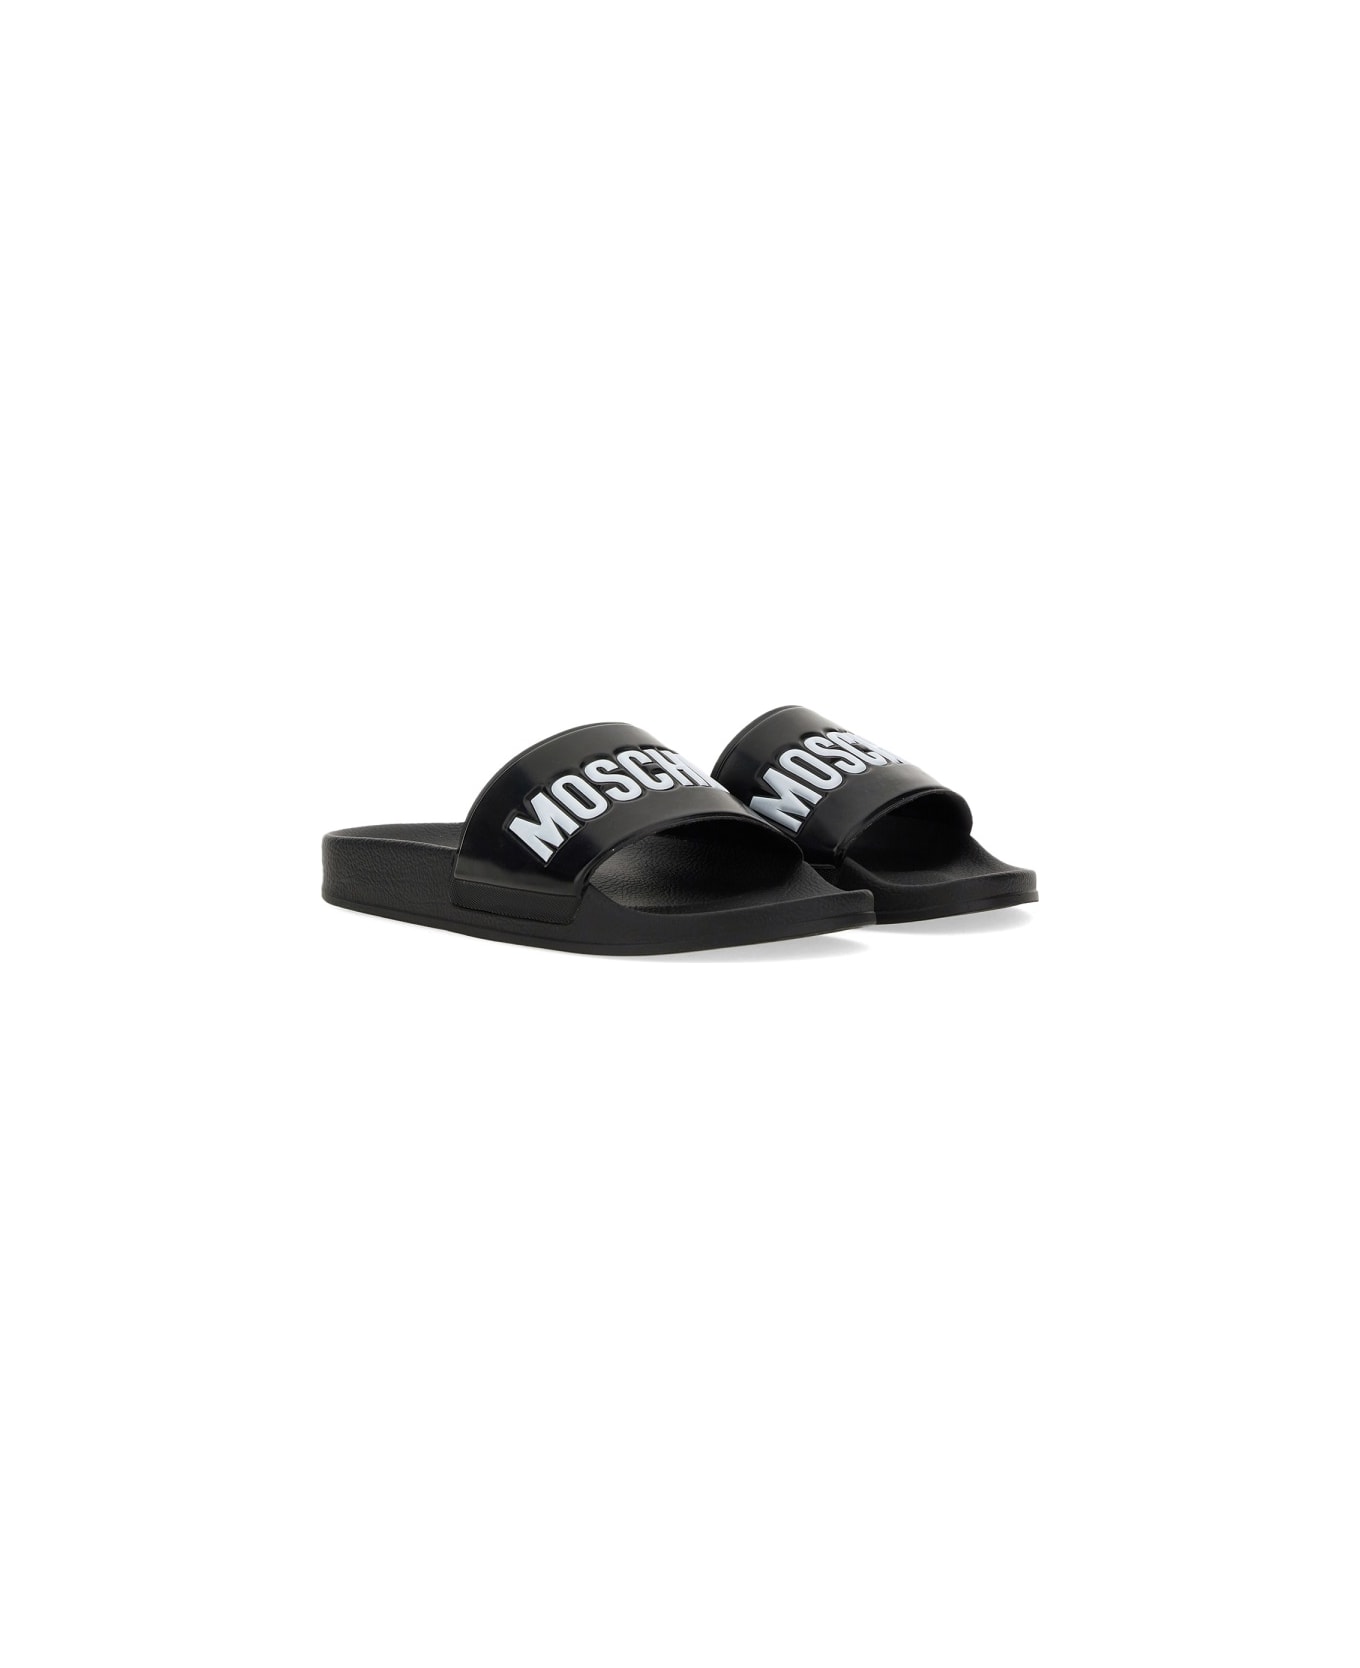 Moschino Sandal With Logo - BLACK その他各種シューズ